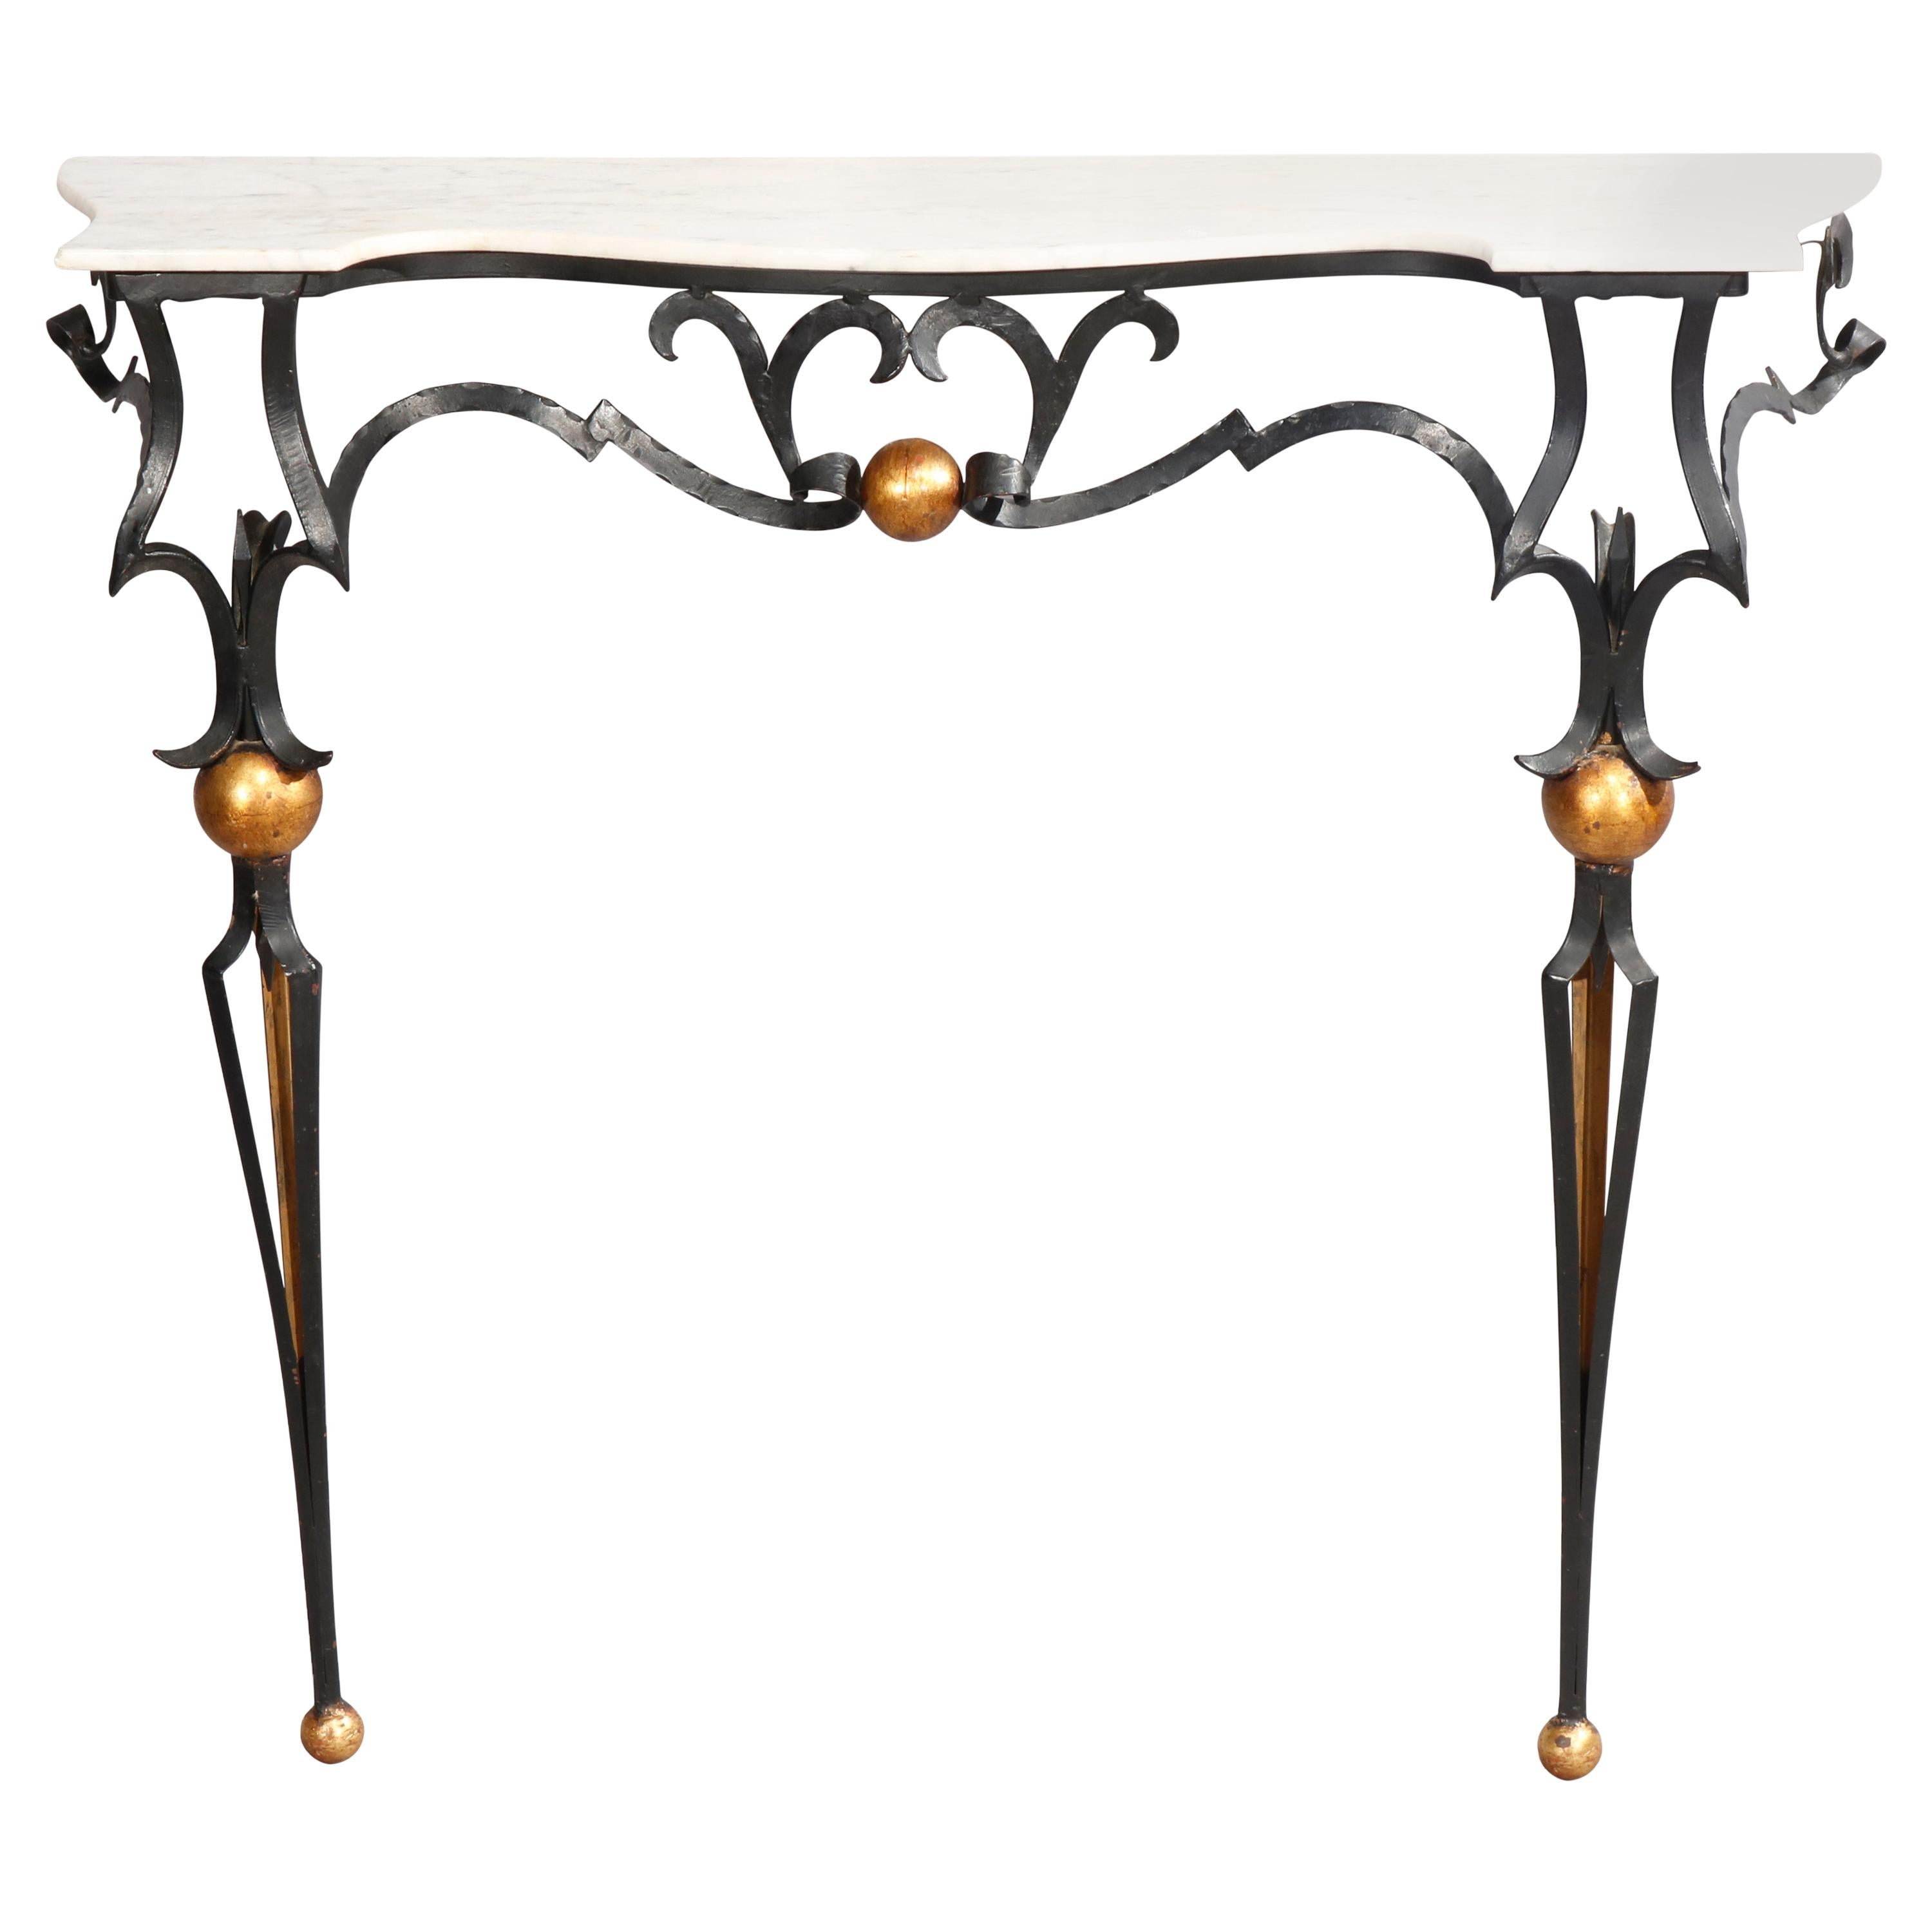 Antique Italian Parcel Gilt Wrought Iron Marble Top Console Table, 20th Century